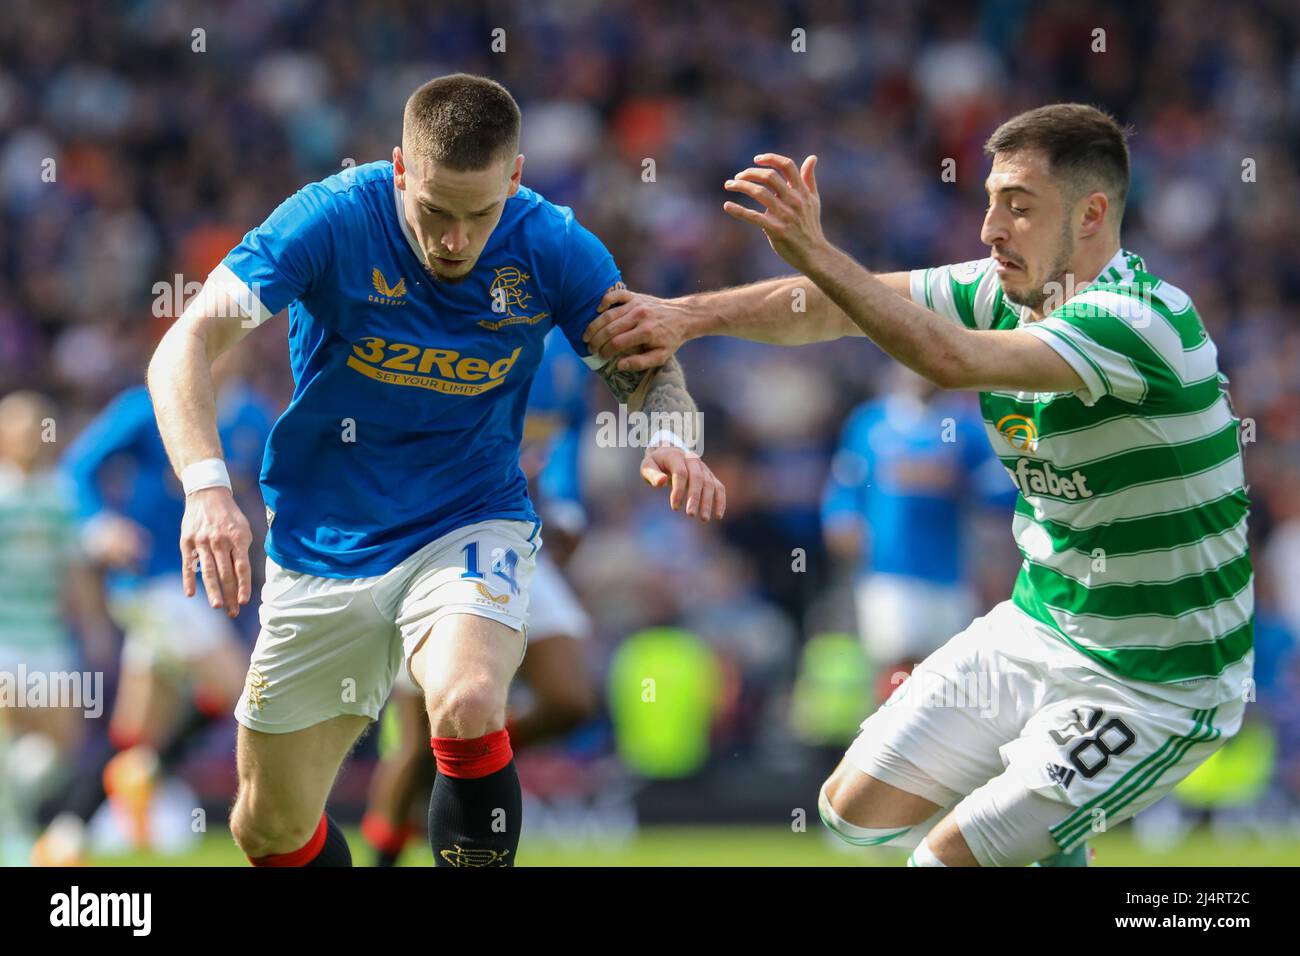 Glasgow, UK. 17th Apr, 2022. Celtic FC play Rangers FC in the Scottish Cup semi-final. The winner of this match goes forwards to play Heart of Midlothian in the final. Credit: Findlay/Alamy Live News Stock Photo